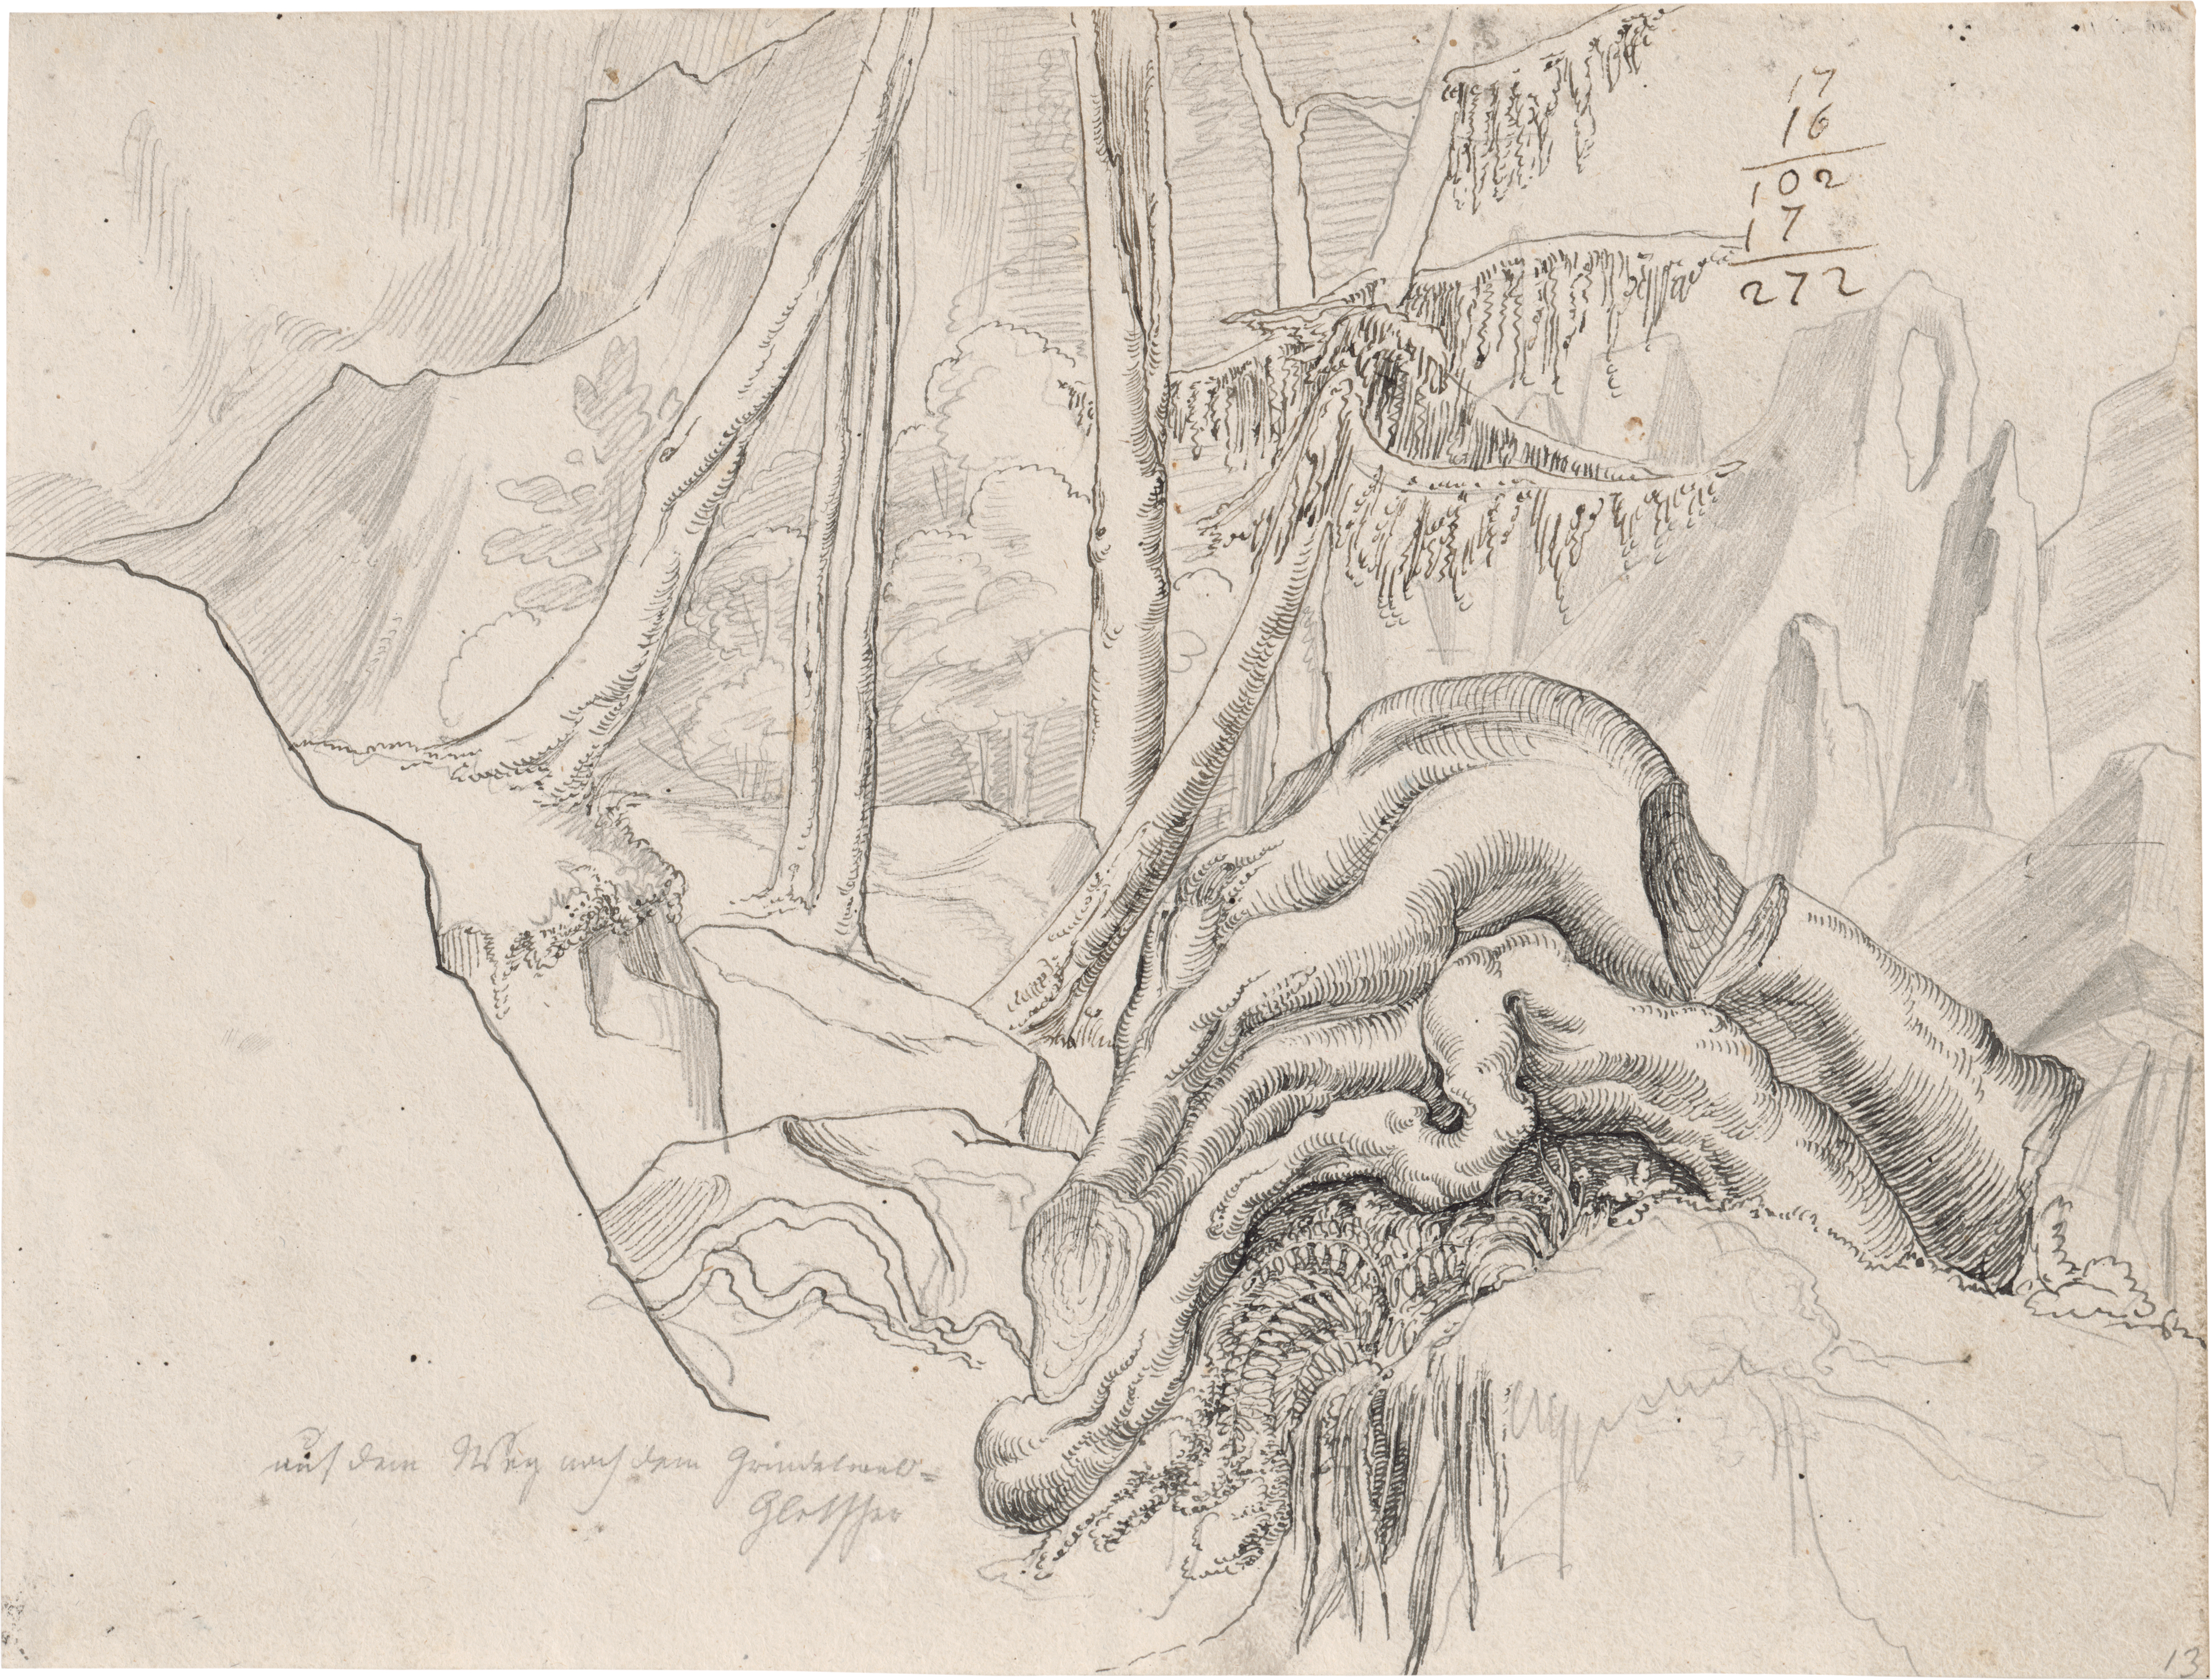 38_von Rohden_drawing Woodland Scene with Tree Roots on the Way to the Grindelwald Glacier